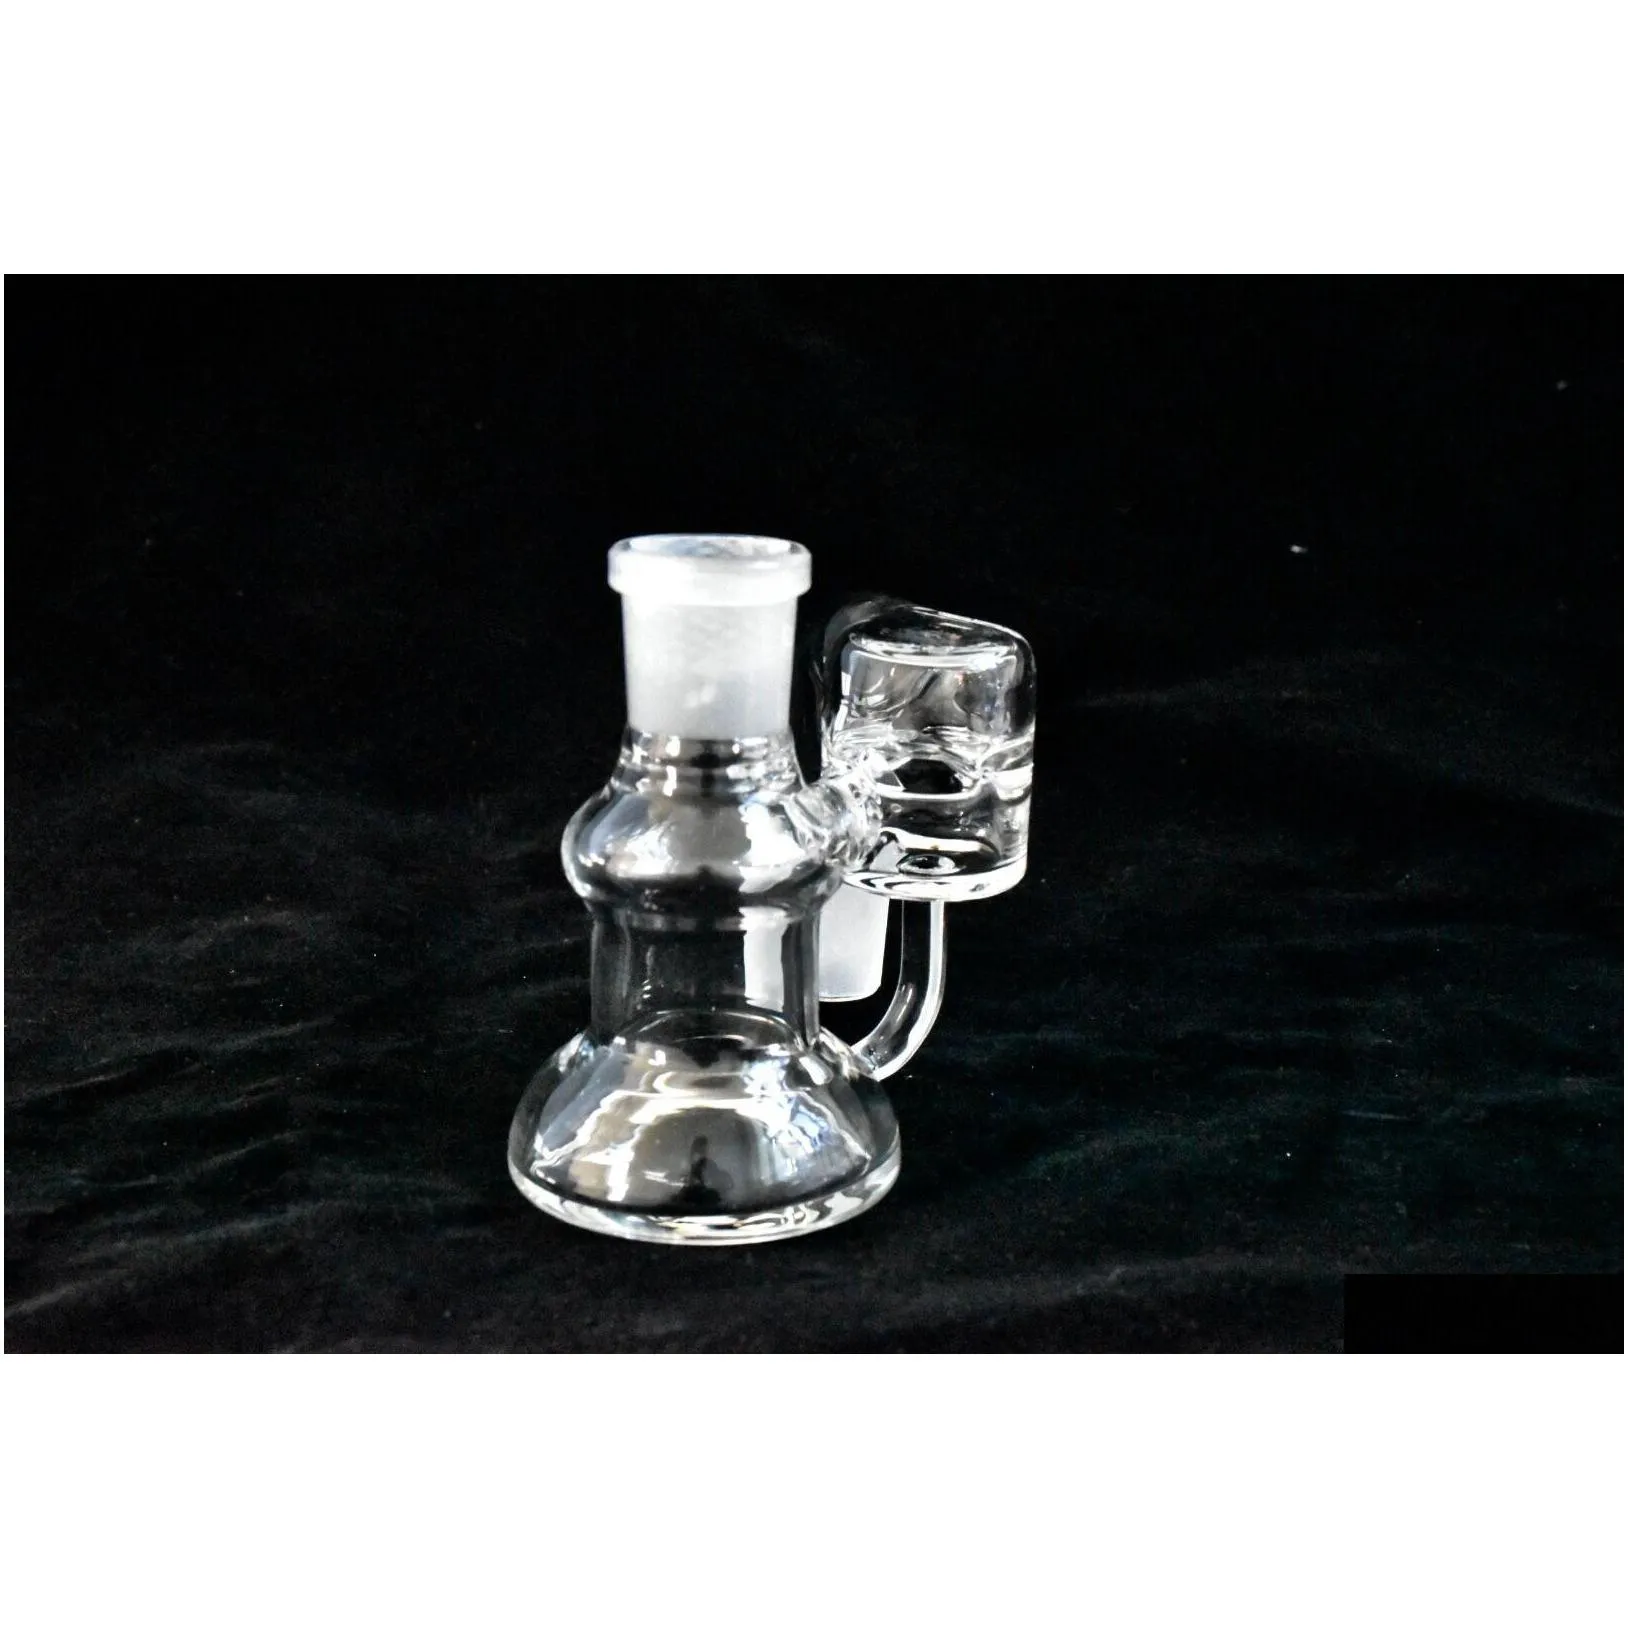 dry ash catcher pipe glass hookah factory direct sale price concessions